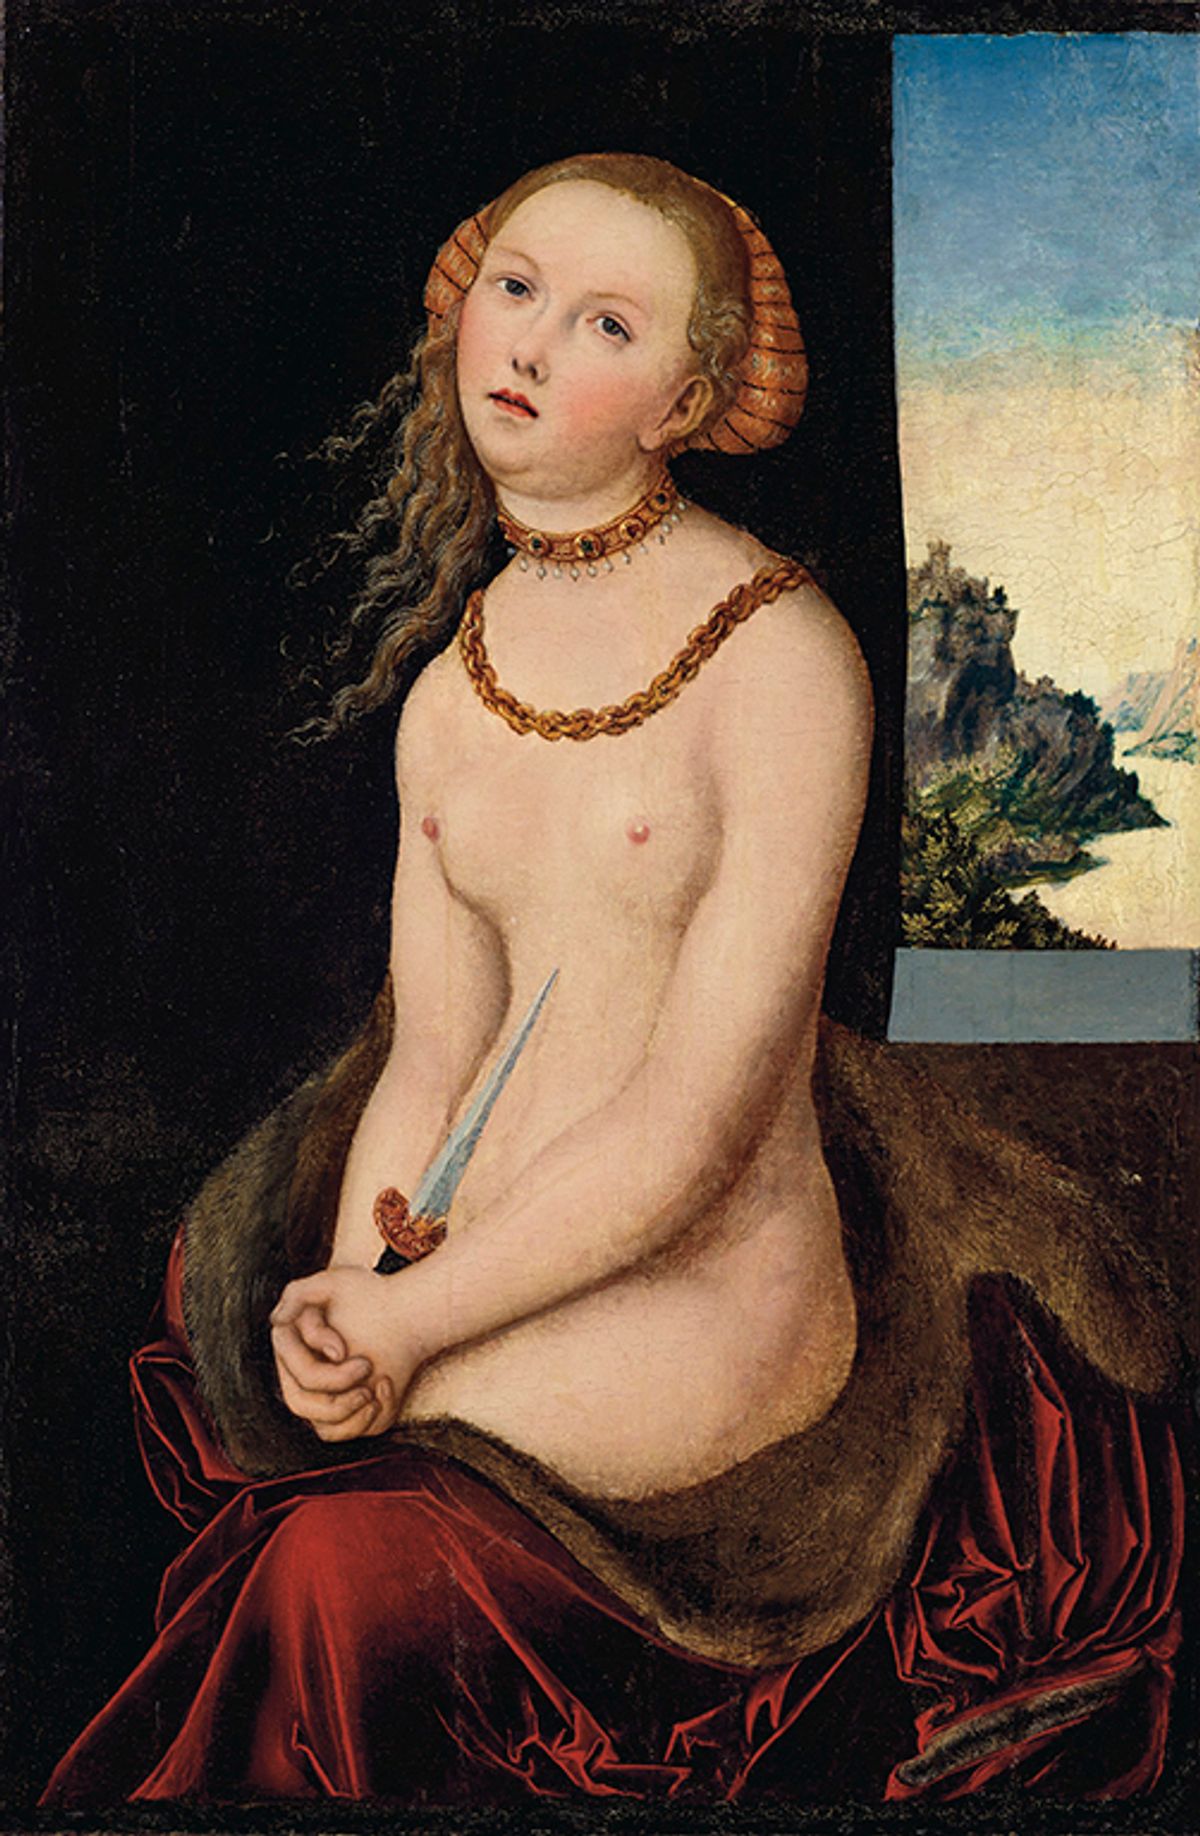 Lucas Cranach the Elder's Lucretia, which netted $4.2m when it was sold by the Brooklyn Museum at Christie's in October. The sale was intended to help finance the institution's collections care under  the relaxed guidelines of the Association of Art Museum Directors 